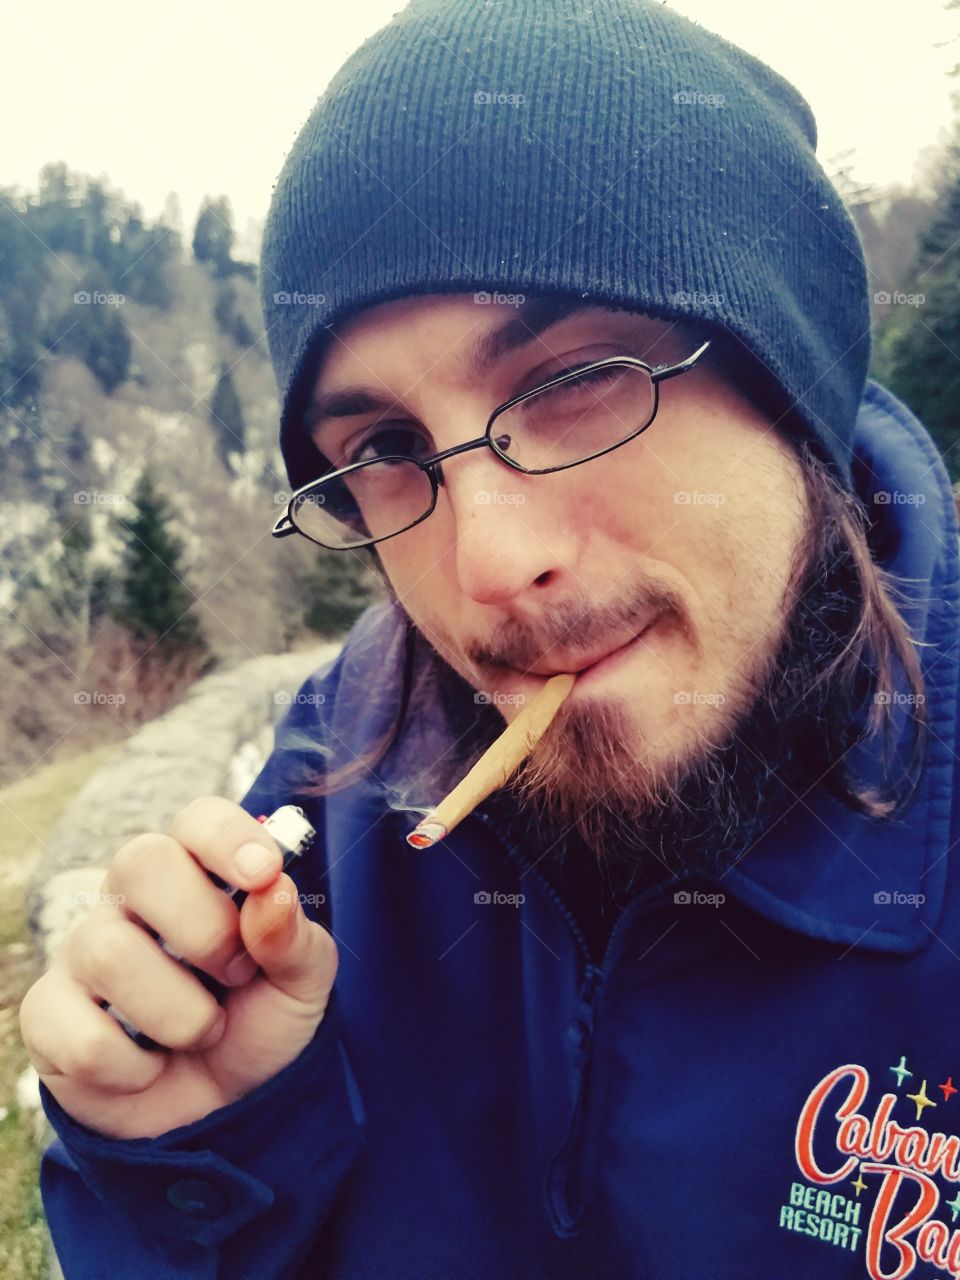 Getting High in the Great Smokey Mountains